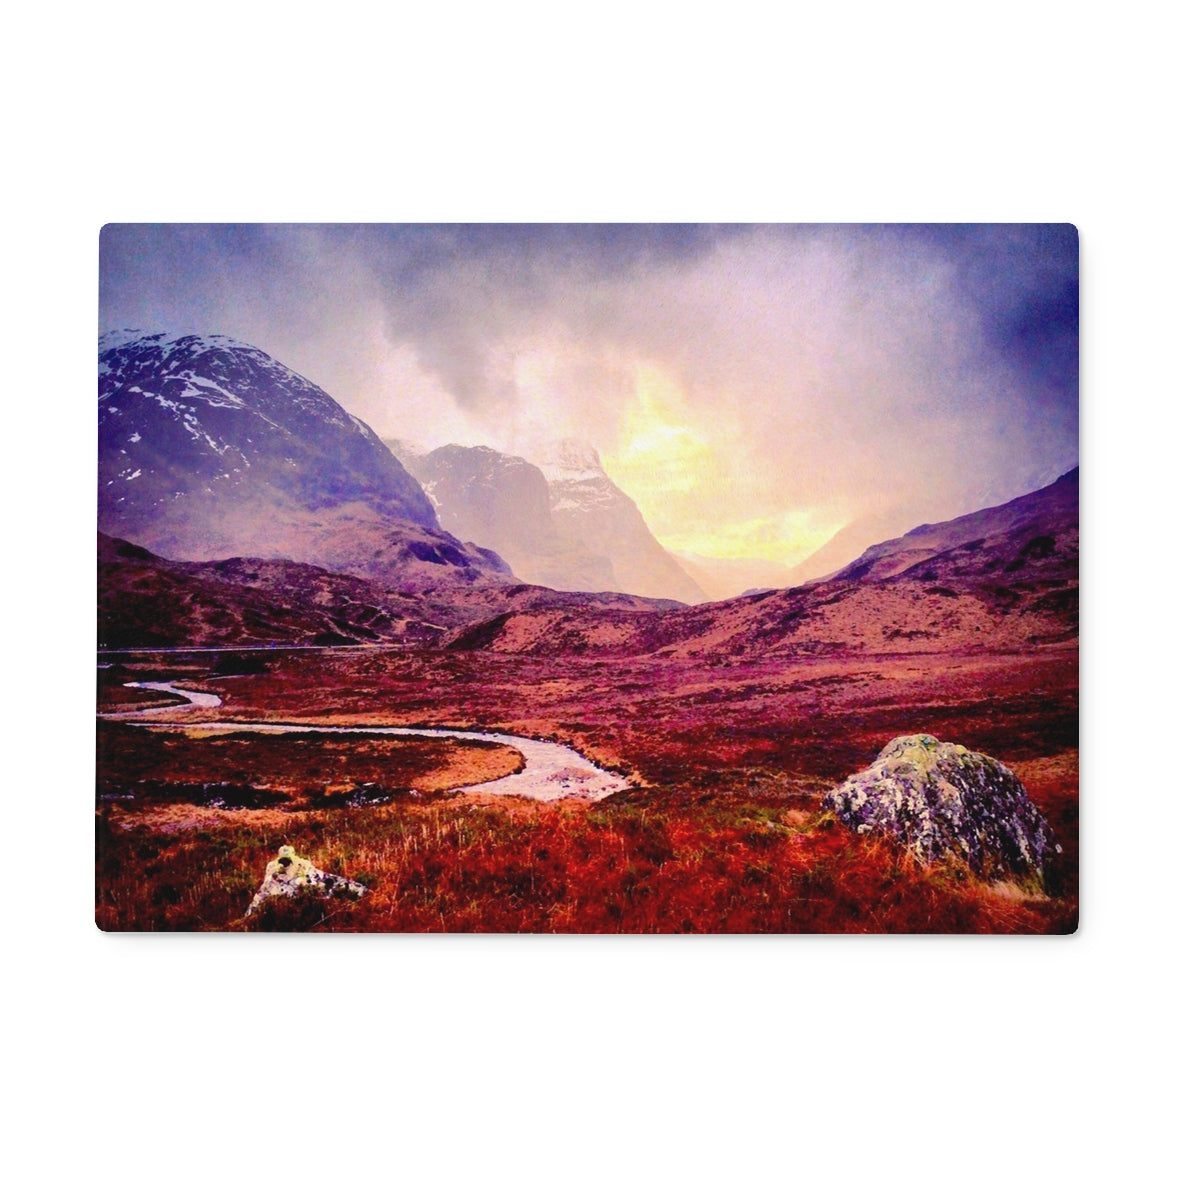 A Brooding Glencoe Art Gifts Glass Chopping Board-Glass Chopping Boards-Glencoe Art Gallery-15"x11" Rectangular-Paintings, Prints, Homeware, Art Gifts From Scotland By Scottish Artist Kevin Hunter